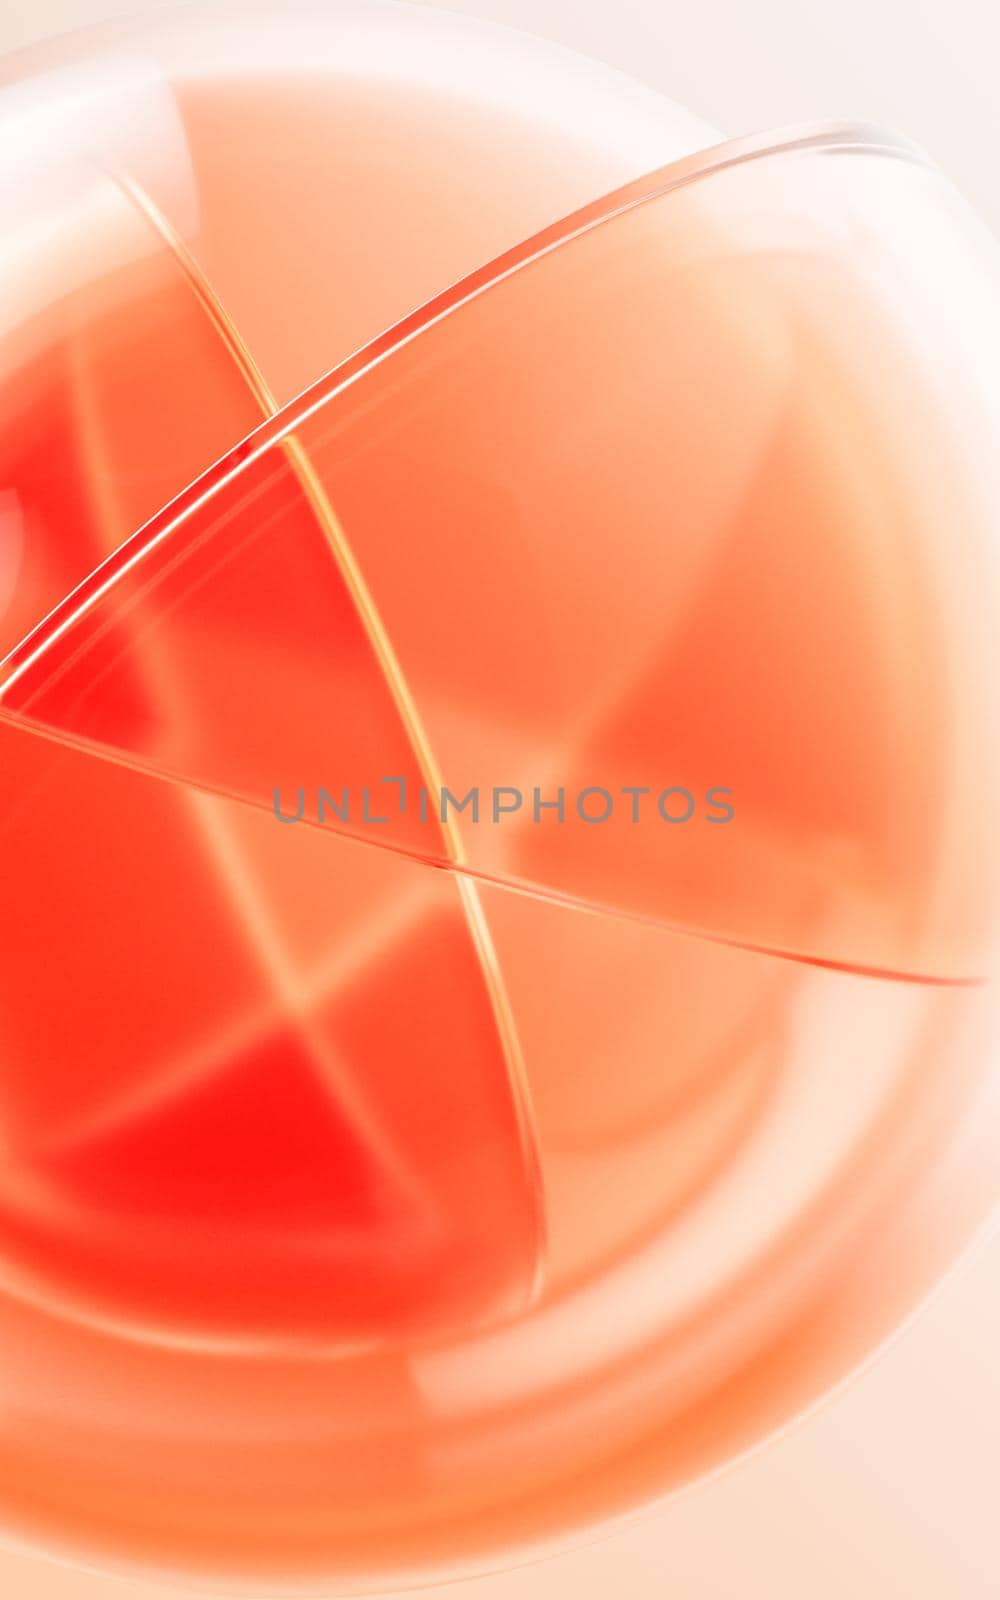 Transparent glass with gradient colors, 3d rendering. by vinkfan